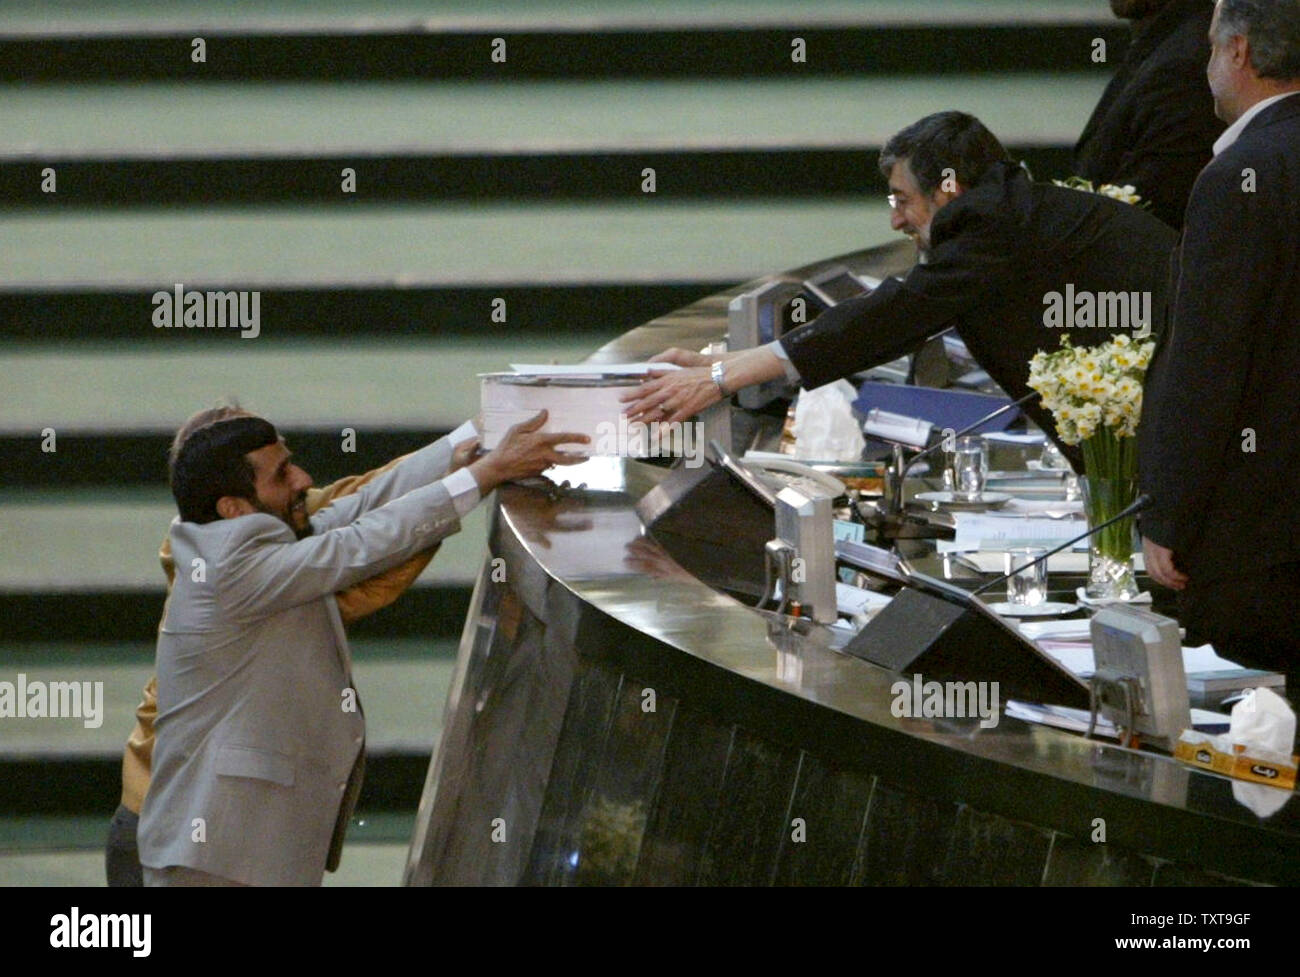 Iran's president Mahmoud Ahmadinejad (L) delivers budget bill to parliament speaker Gholamali Haddad Adel in parliament in Tehran, Iran on January 15, 2006. Iranian President Mahmoud Ahmadinejad said his nation has no intention of building nuclear weapons amid rising international concern that the Islamic nation's uranium enrichment research is a front for developing atomic bombs.(UPI Photo/Mohammad Kheirkhah) Stock Photo